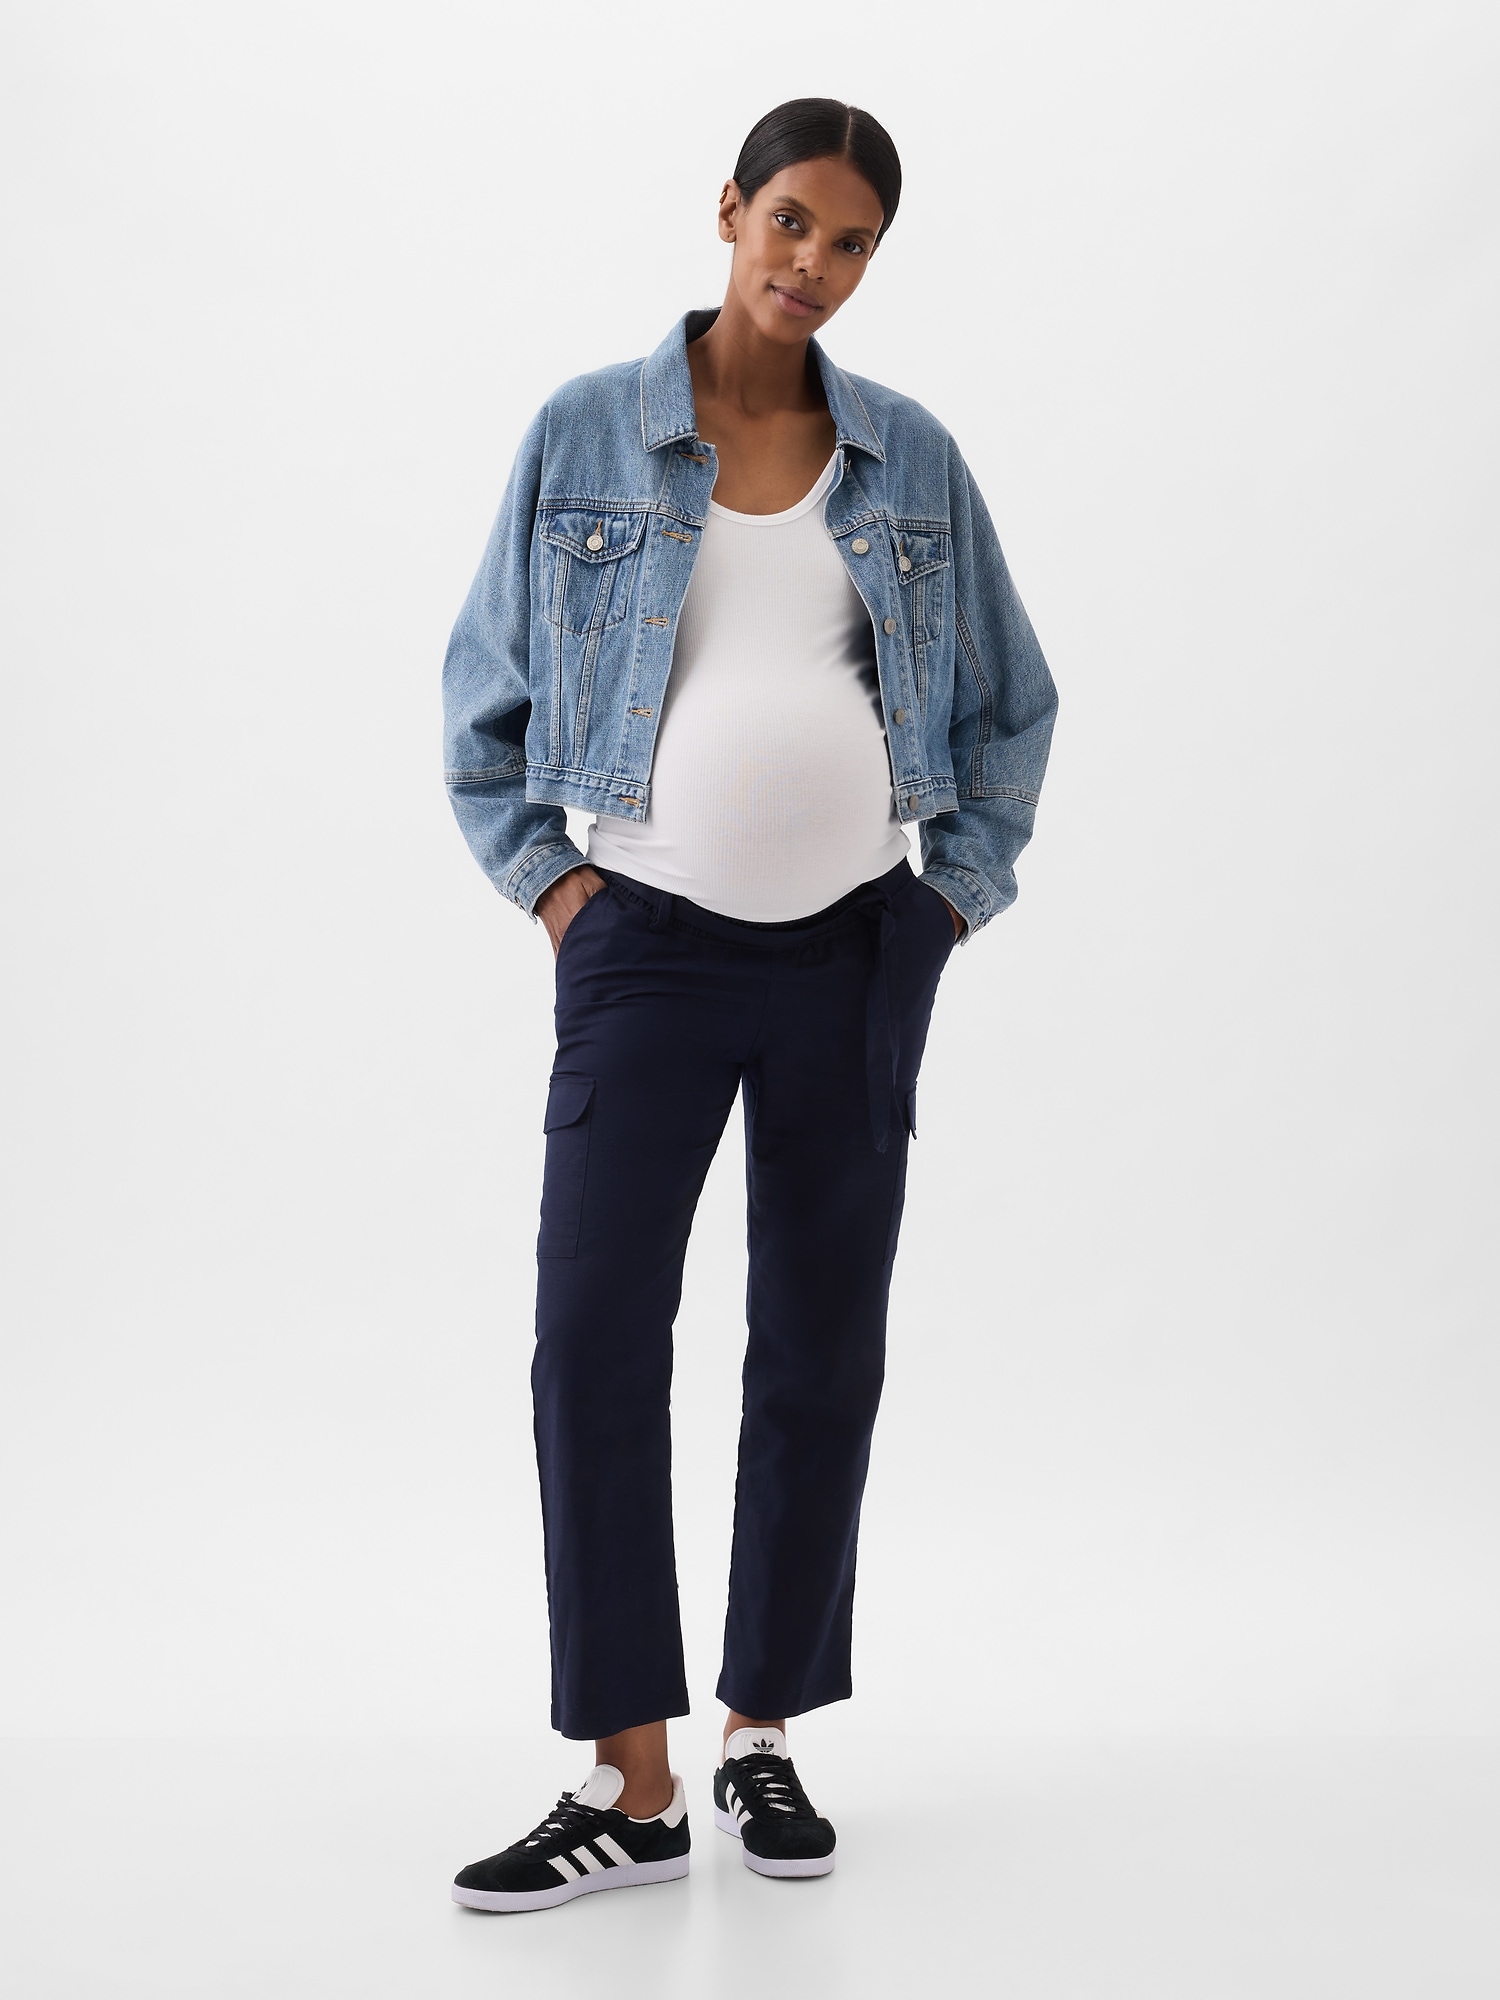 Maternity Clothes for Home